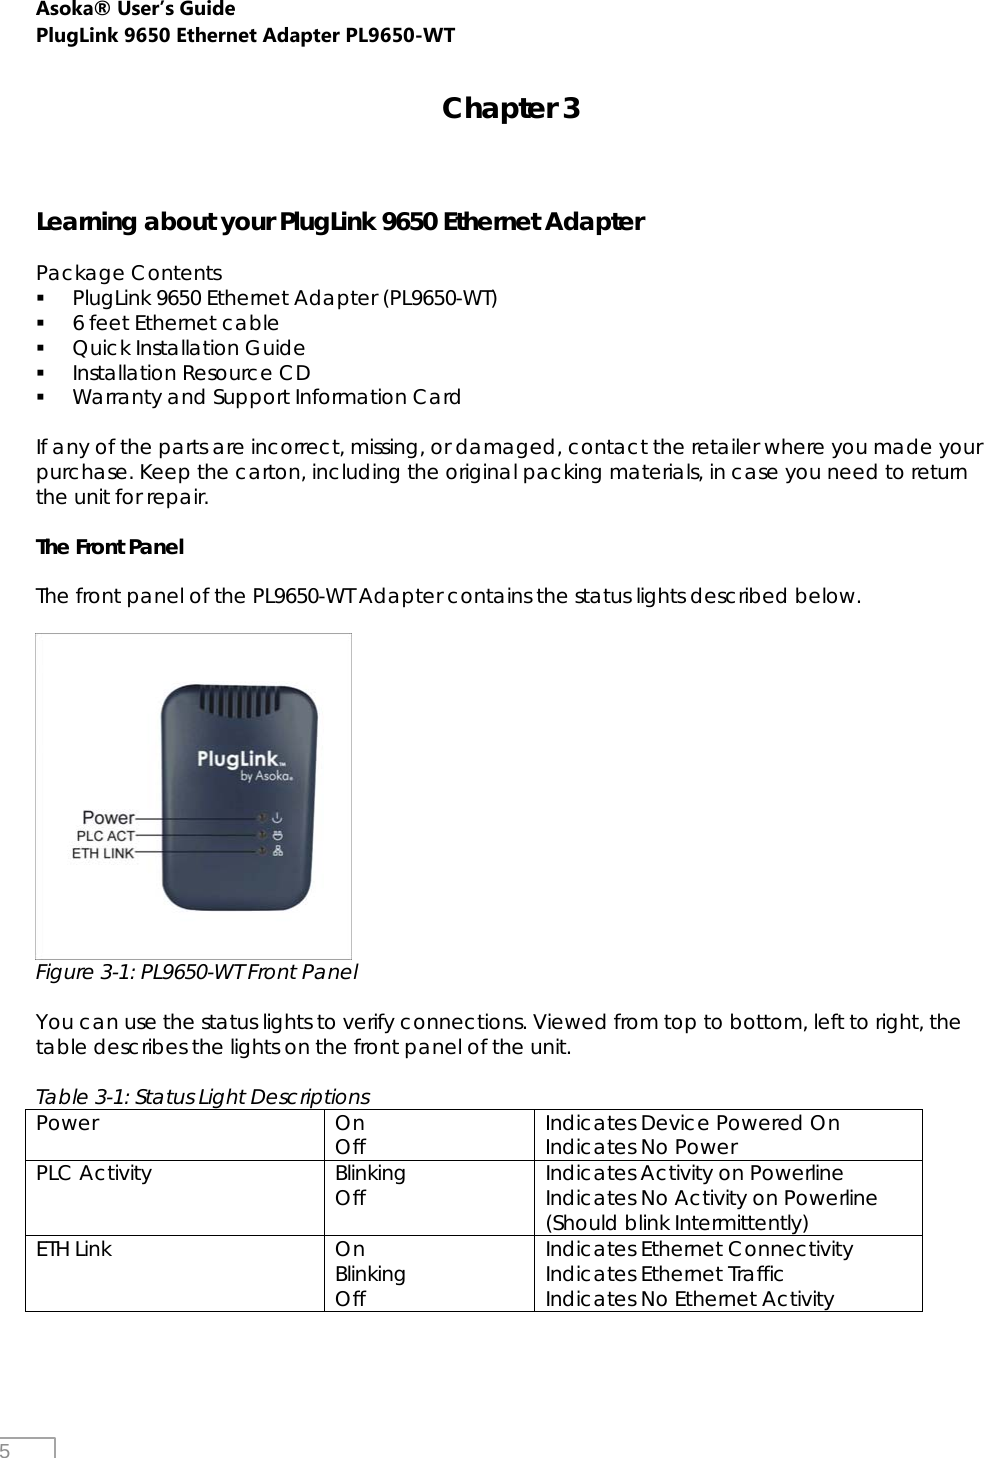 Asoka® User’s Guide PlugLink 9650 Ethernet Adapter PL9650-WT   5 Chapter 3    Learning about your PlugLink 9650 Ethernet Adapter  Package Contents  PlugLink 9650 Ethernet Adapter (PL9650-WT)  6 feet Ethernet cable  Quick Installation Guide  Installation Resource CD  Warranty and Support Information Card  If any of the parts are incorrect, missing, or damaged, contact the retailer where you made your purchase. Keep the carton, including the original packing materials, in case you need to return the unit for repair.   The Front Panel  The front panel of the PL9650-WT Adapter contains the status lights described below.   Figure 3-1: PL9650-WT Front Panel  You can use the status lights to verify connections. Viewed from top to bottom, left to right, the table describes the lights on the front panel of the unit.  Table 3-1: Status Light Descriptions Power On Off  Indicates Device Powered On Indicates No Power PLC Activity  Blinking Off  Indicates Activity on Powerline Indicates No Activity on Powerline (Should blink Intermittently) ETH Link  On Blinking Off Indicates Ethernet Connectivity Indicates Ethernet Traffic Indicates No Ethernet Activity   